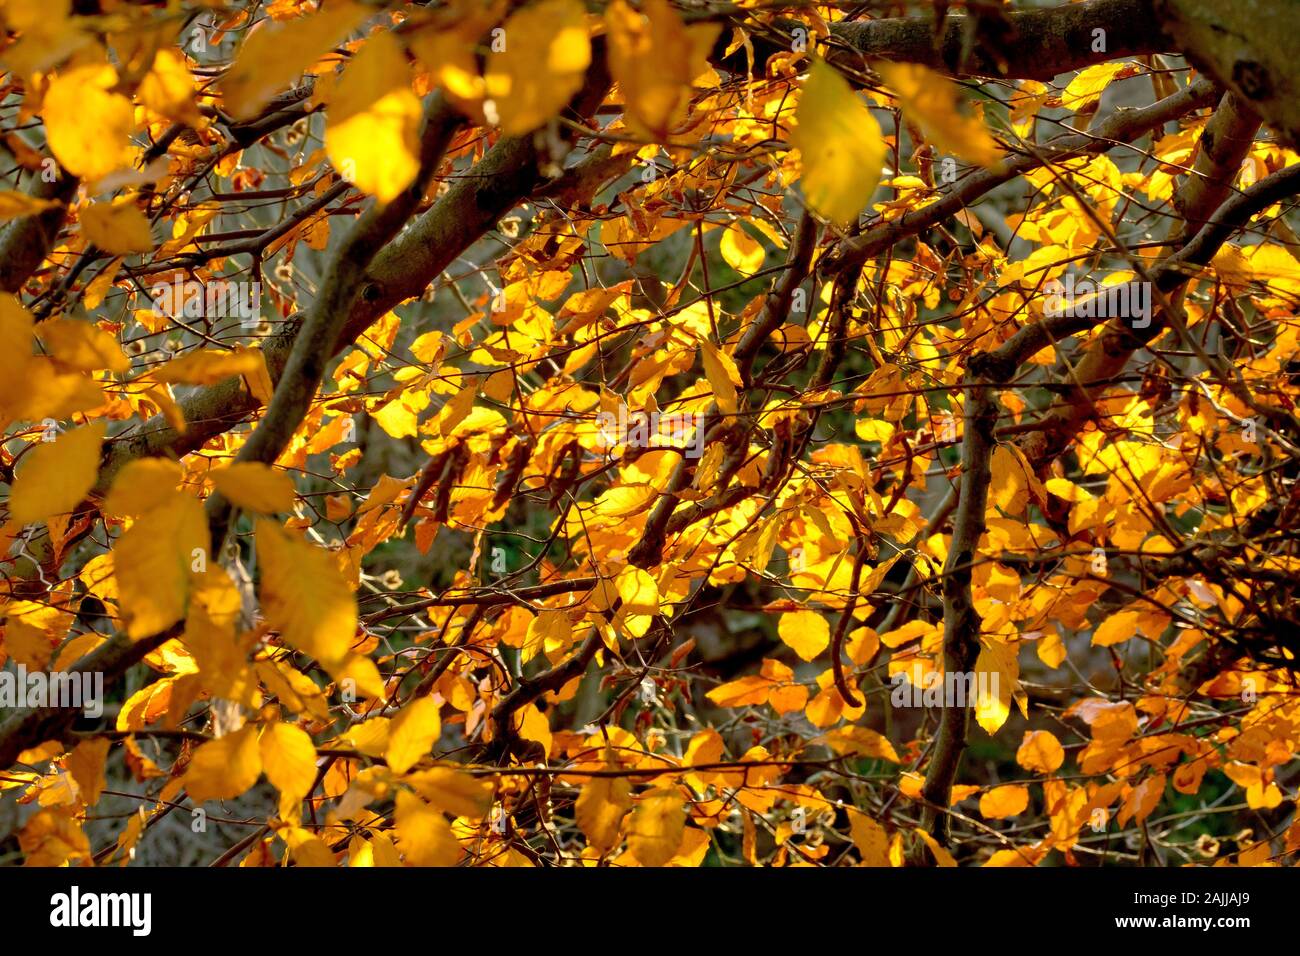 Autumn Beech leaves (fagus sylvatica), backlit by low, warm sunlight. Stock Photo